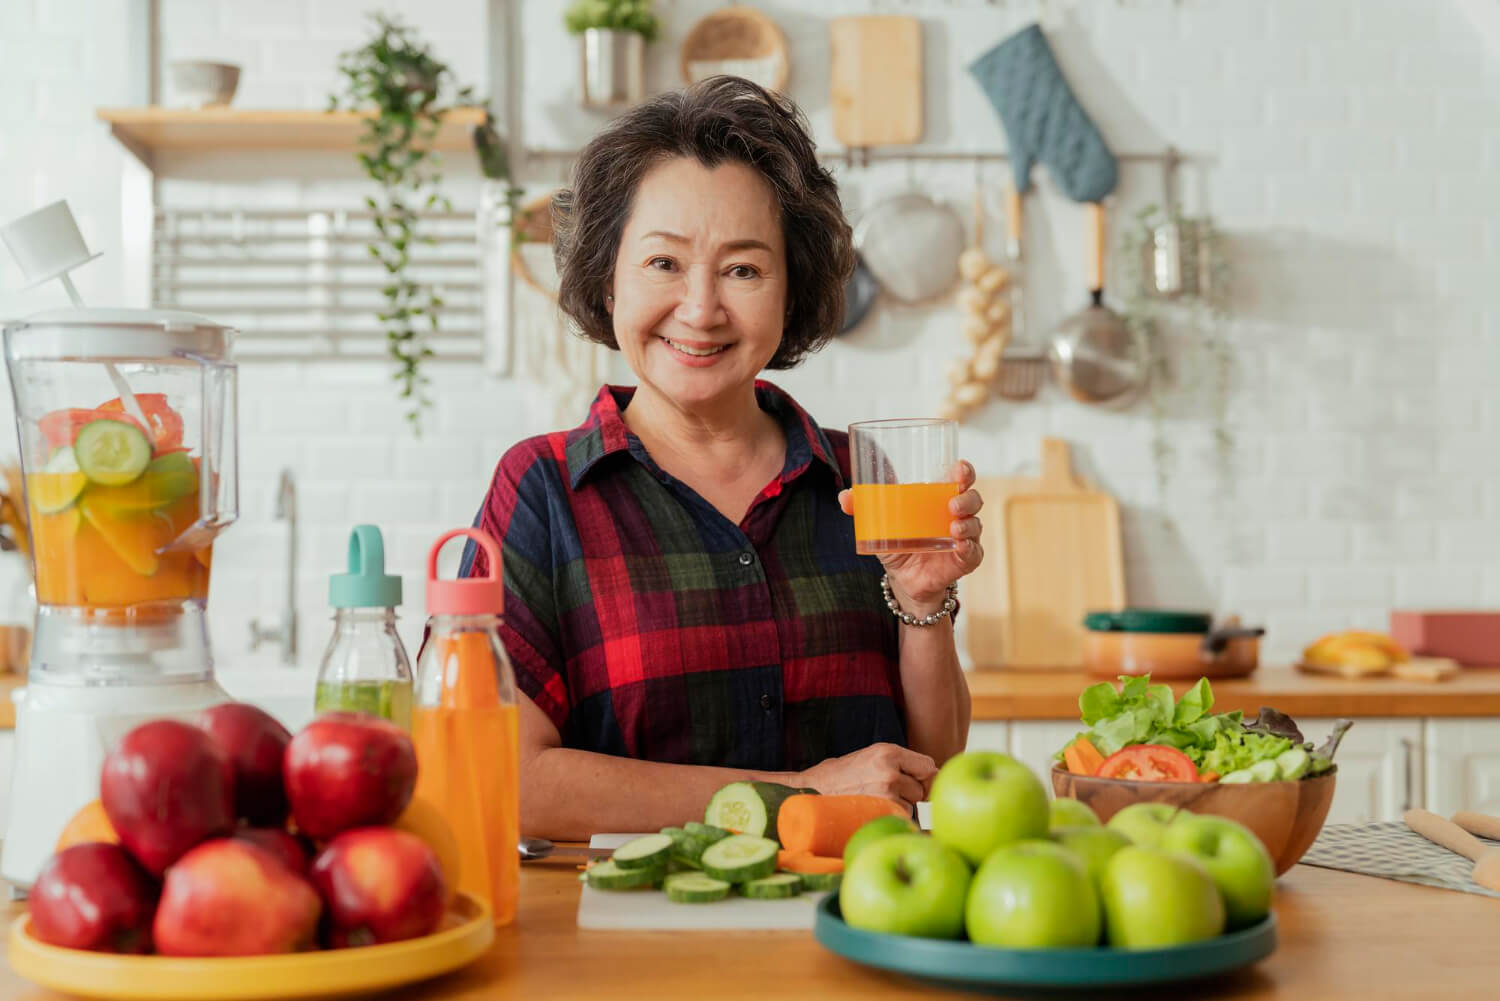 mature-smiling-woman-cook-salad-fruits-vegetables-attractive-mature-woman-with-fresh-green-fruit-salad-home-senior-woman-apron-standing-kitchen-counter-relaxing-house-weekend-time